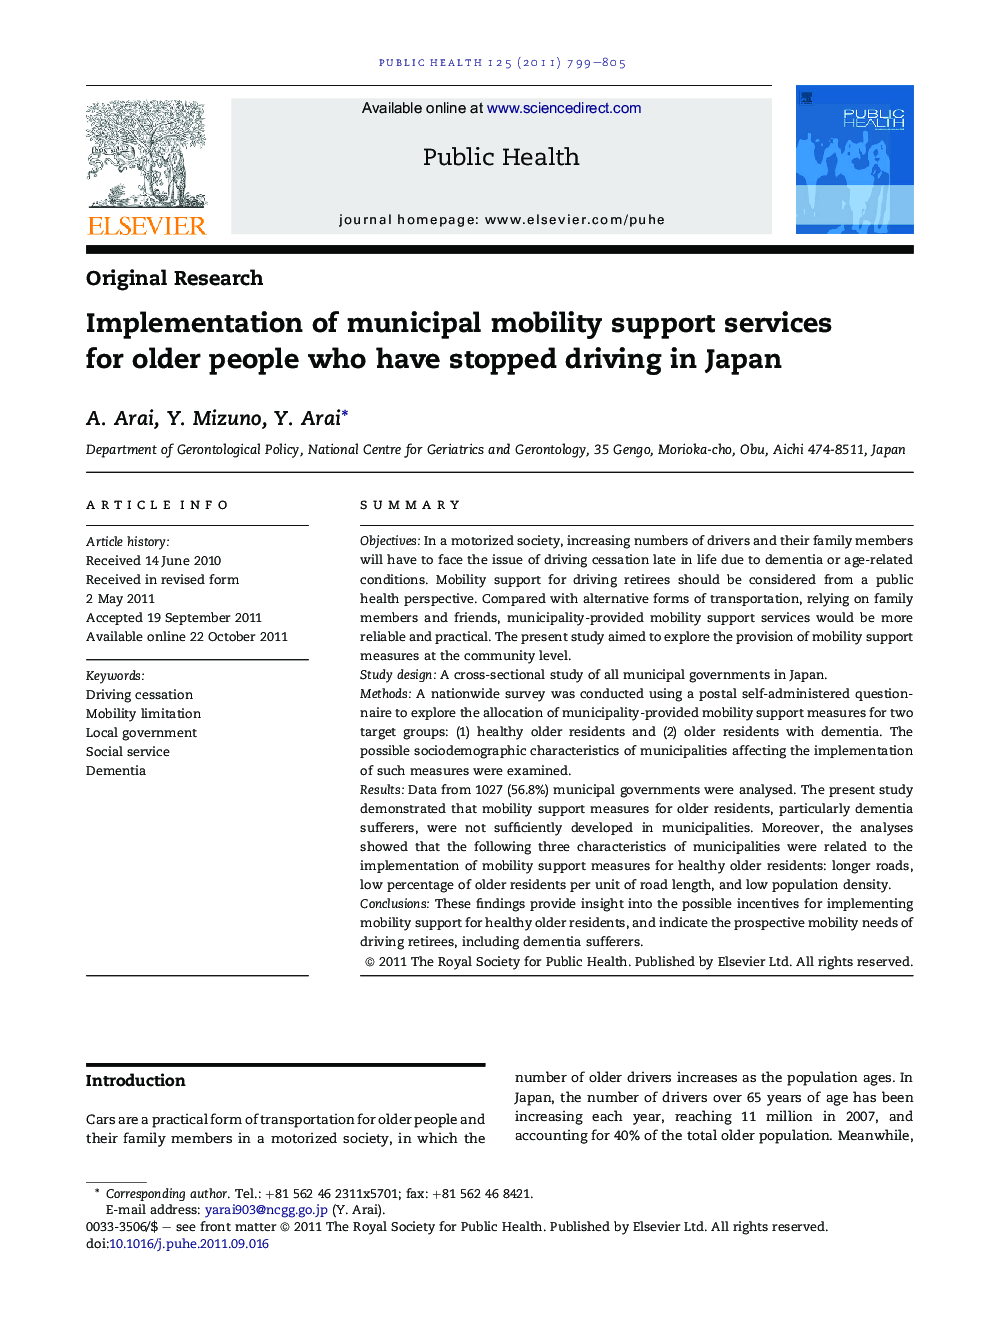 Implementation of municipal mobility support services for older people who have stopped driving in Japan